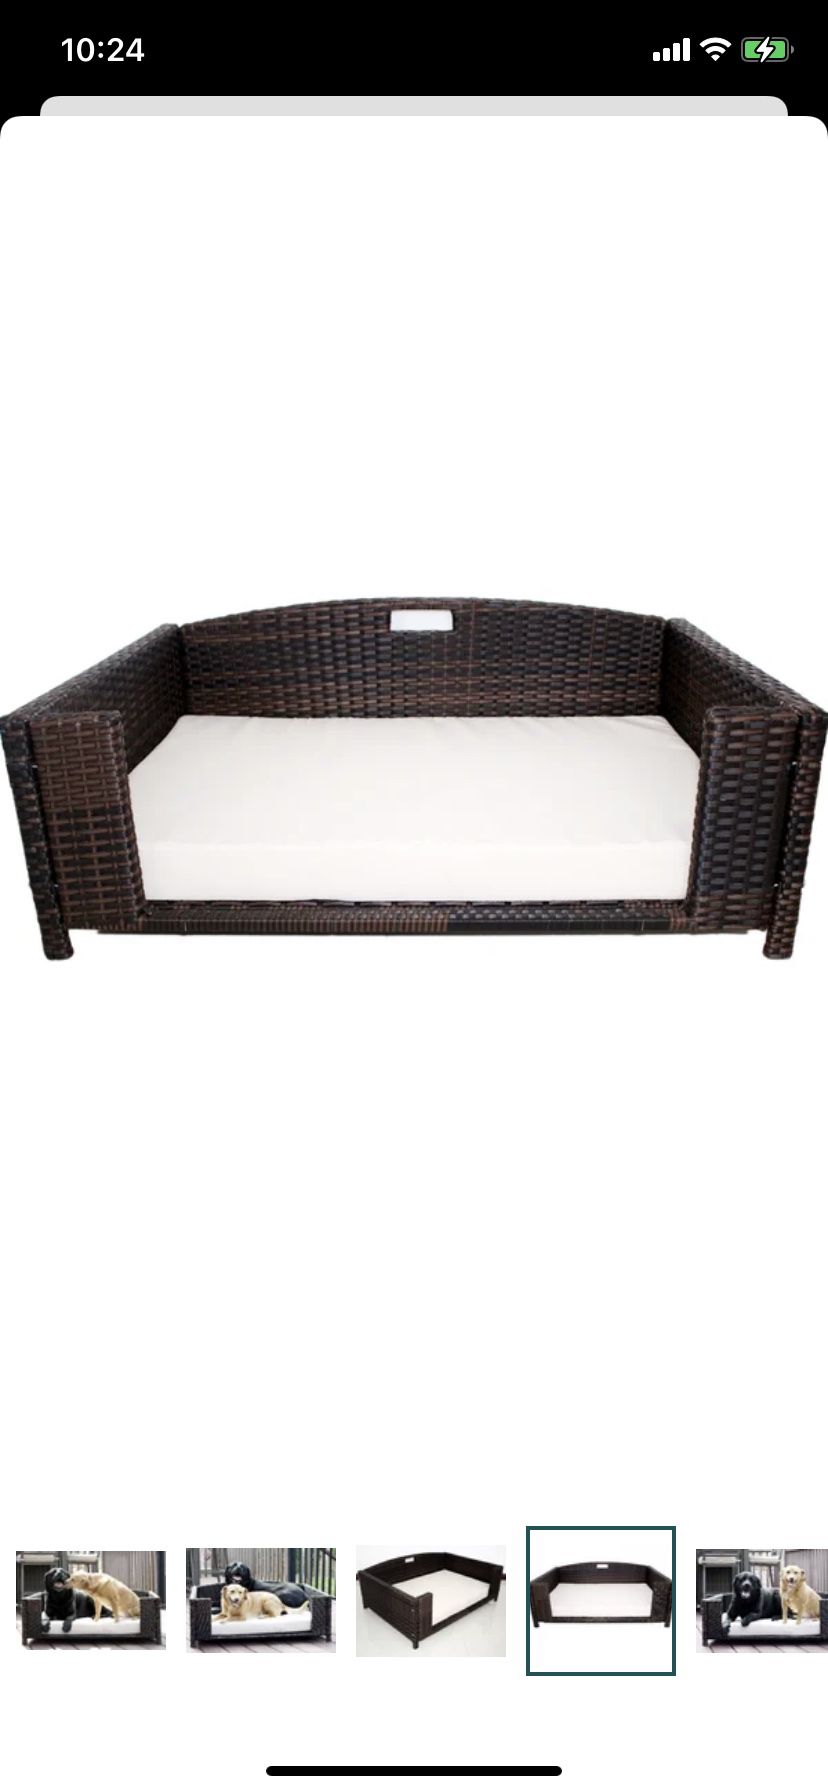 Great Dog Bed  2x3 